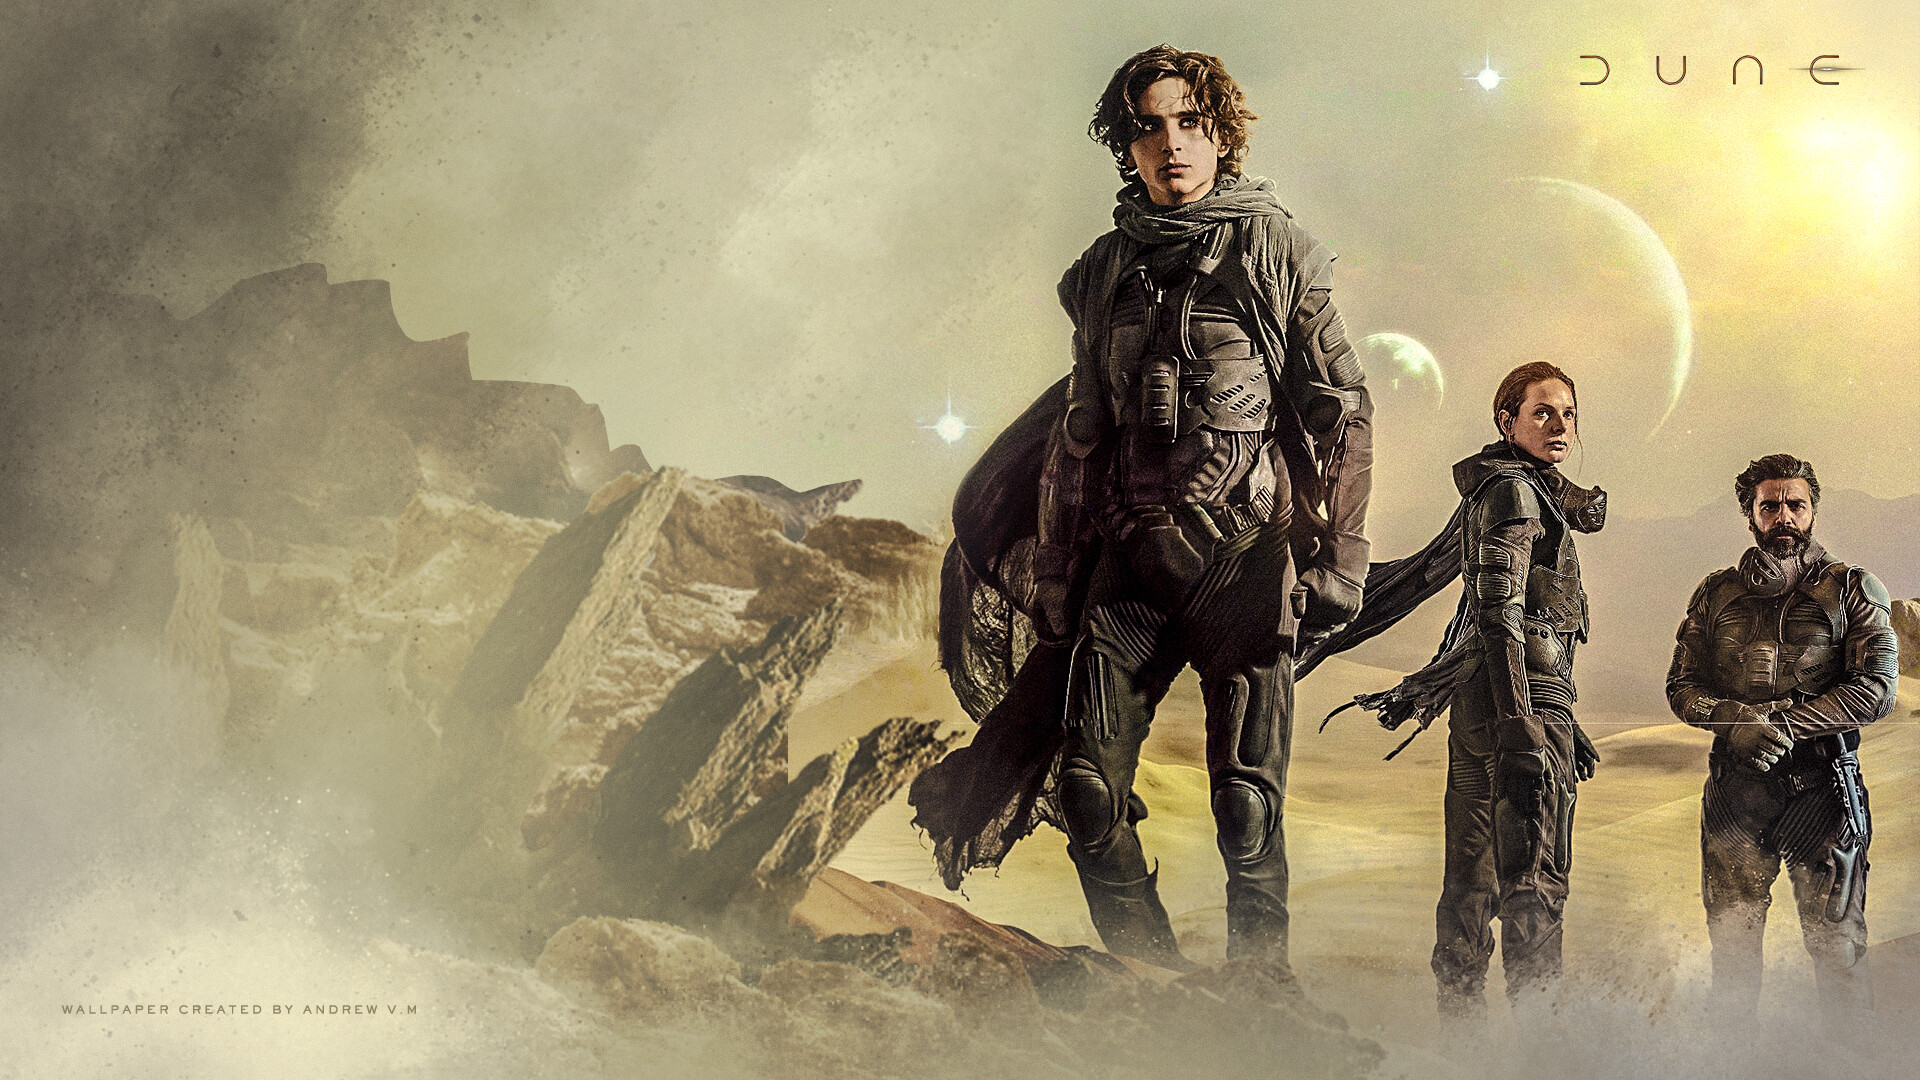 Dune (2021): Paul Atreides, a brilliant and gifted young man born into a great destiny beyond his understanding, must travel to the most dangerous planet in the universe to ensure the future of his family and his people, Sci-fi. 1920x1080 Full HD Background.